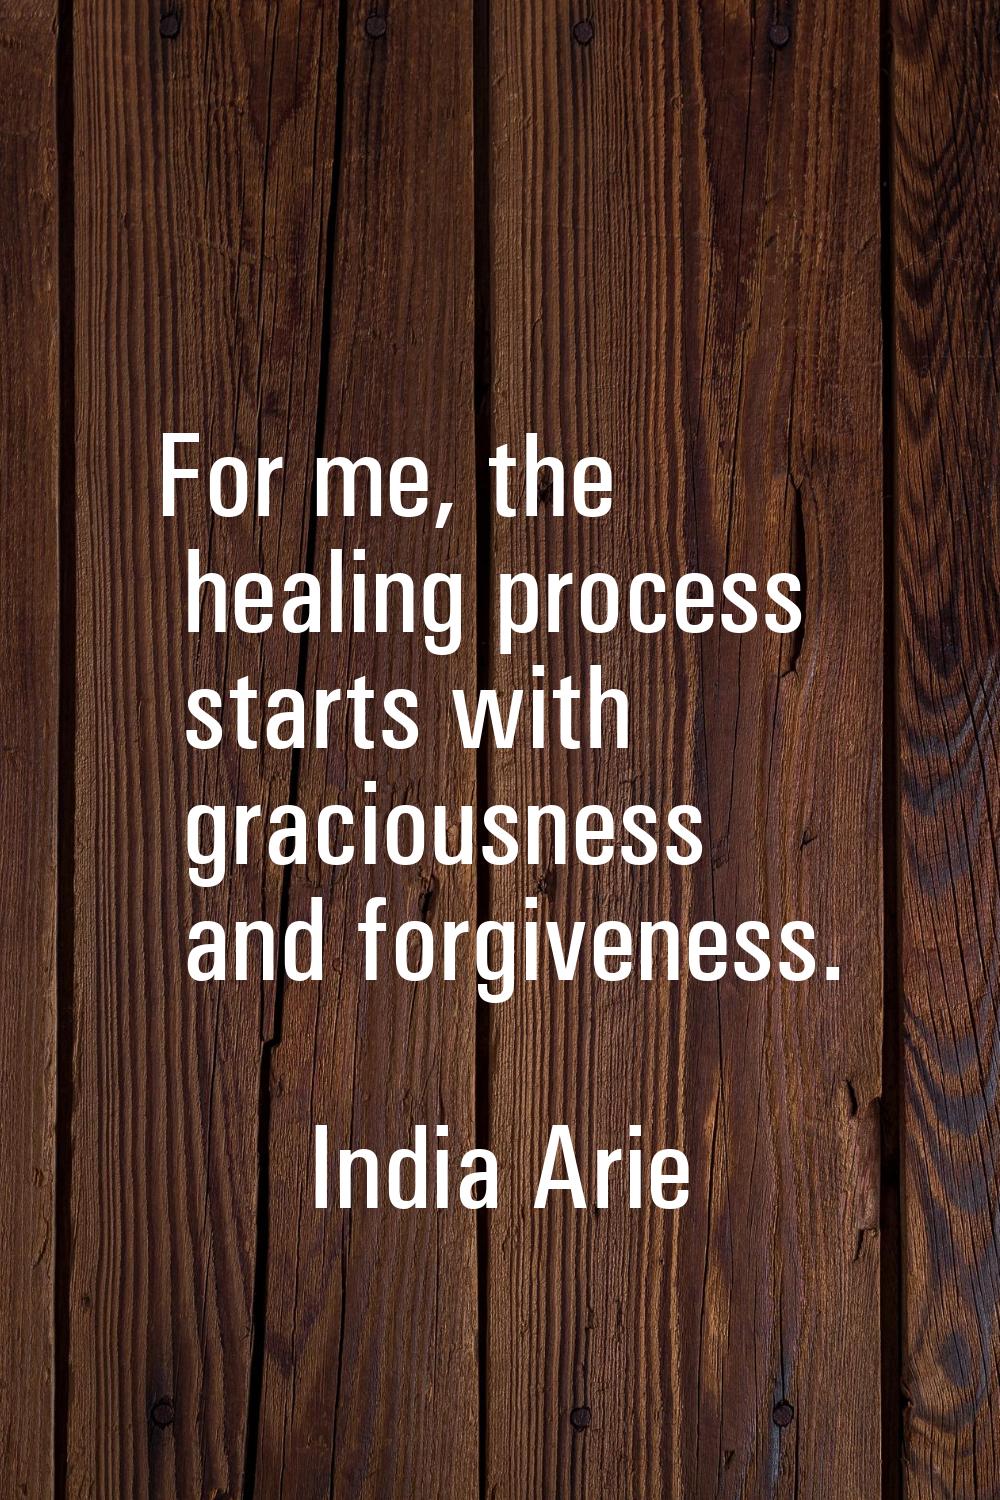 For me, the healing process starts with graciousness and forgiveness.